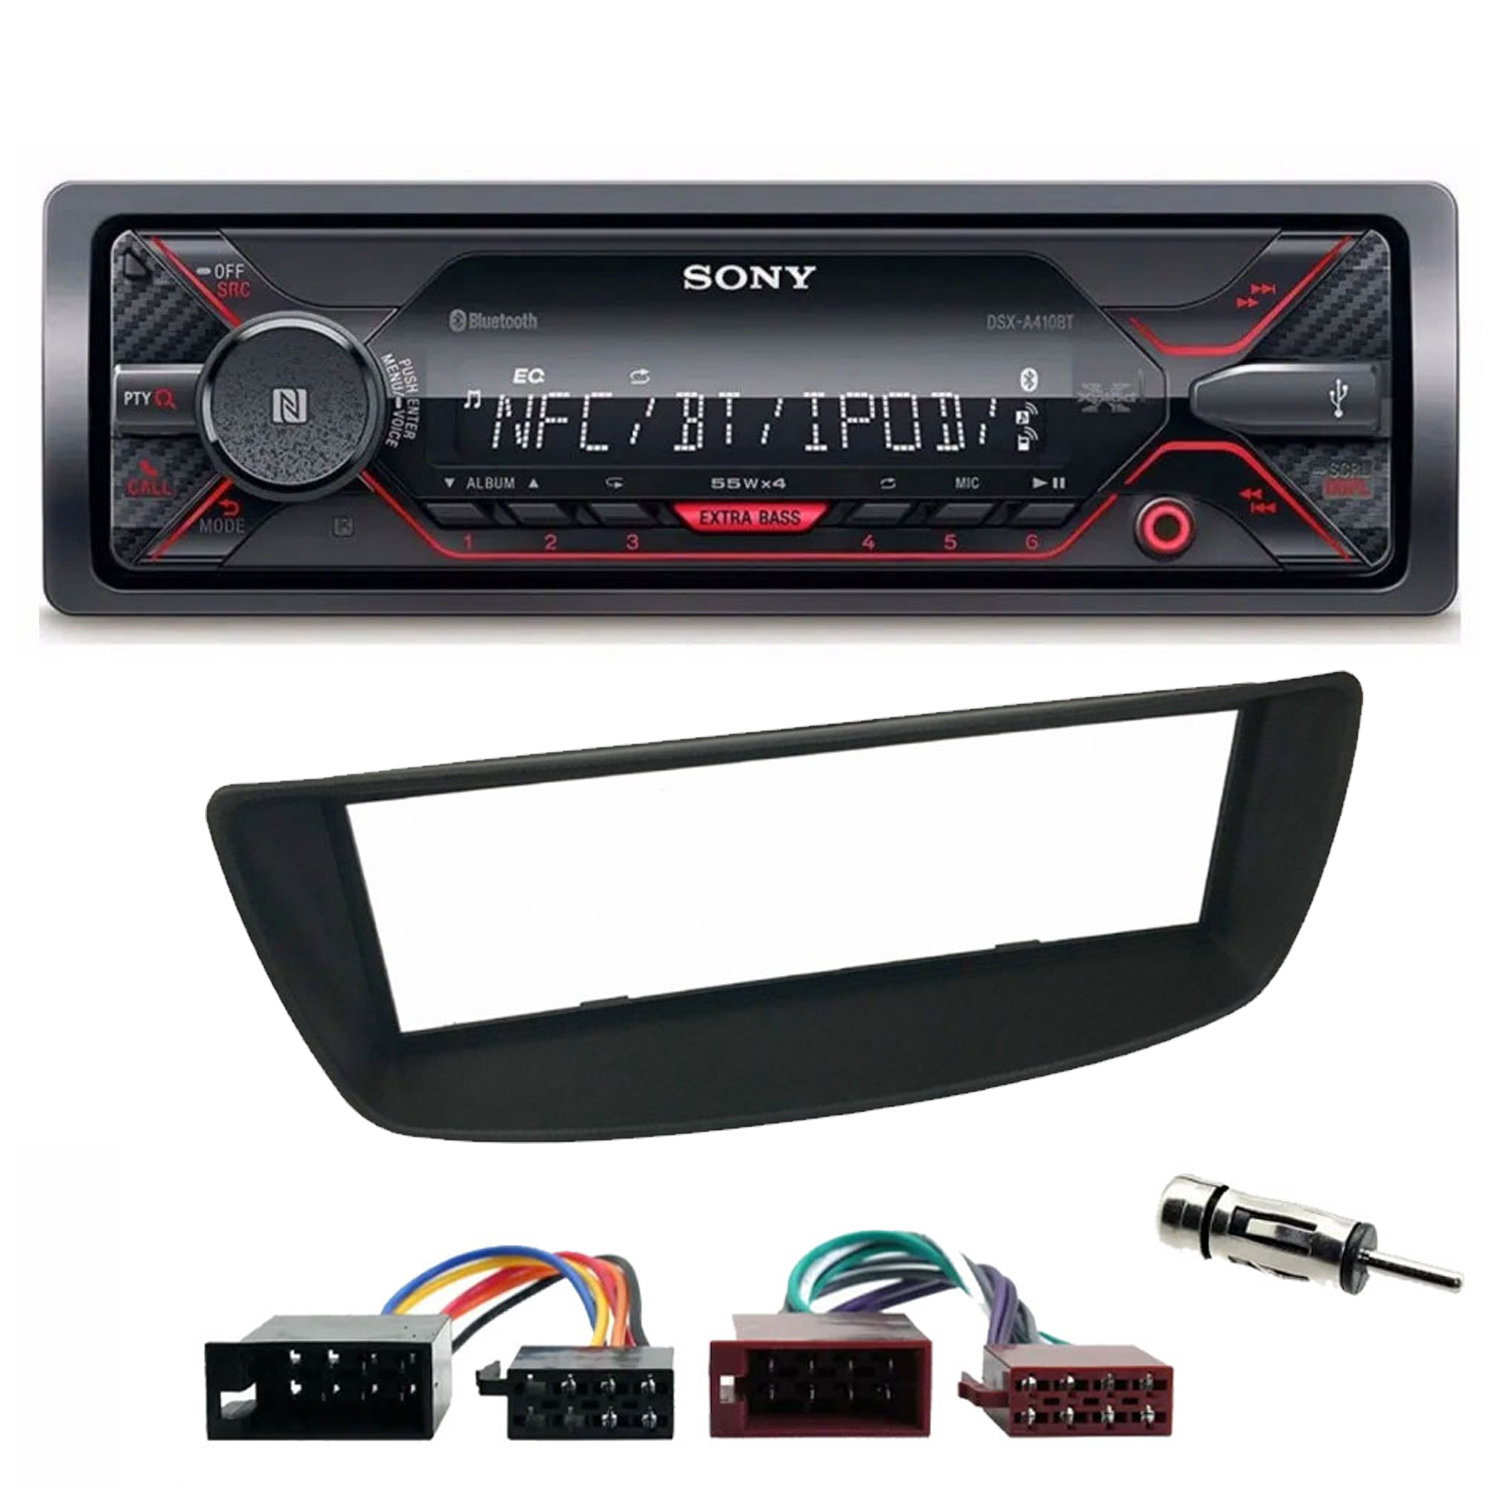 Peugeot 107 2005 - 2014 Sony Mechless Bluetooth USB iPhone iPod Car Stereo Upgrade Kit